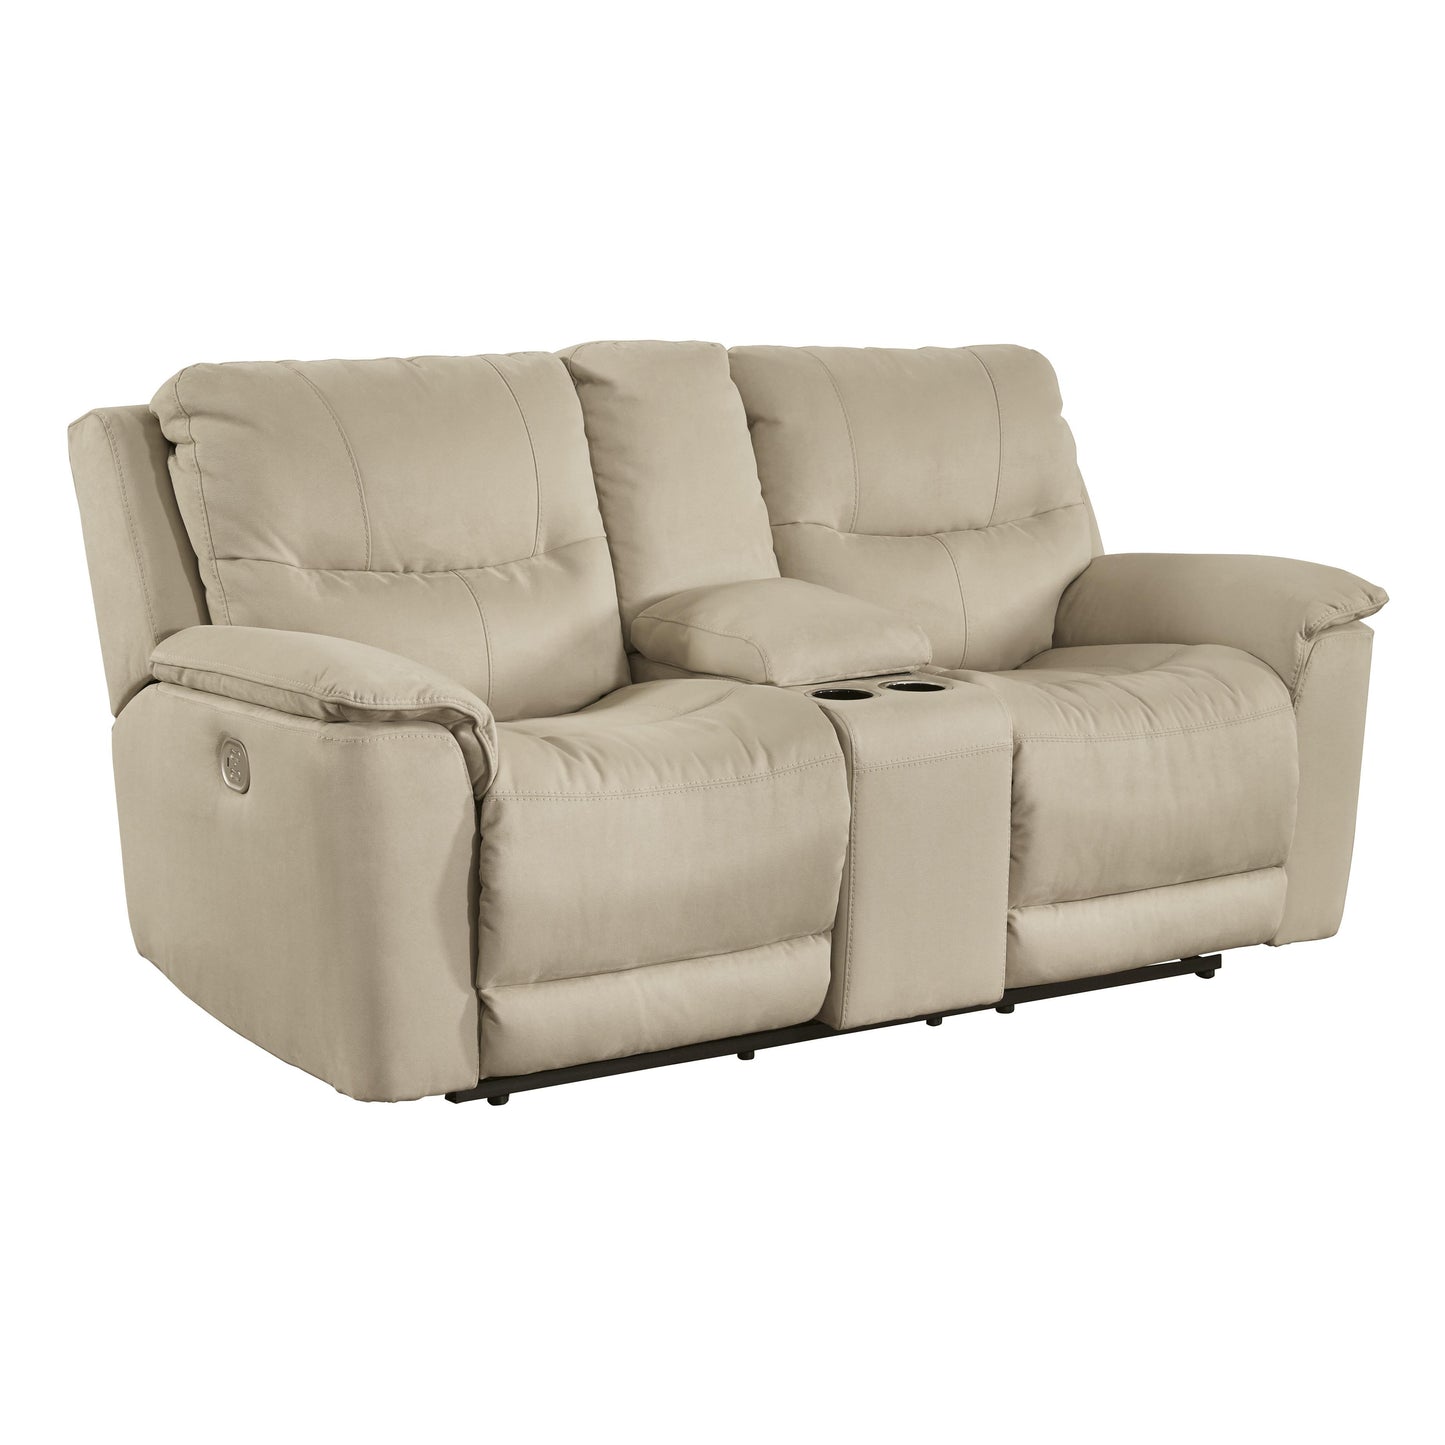 Signature Design by Ashley Next-Gen Gaucho Power Reclining Leather Look Loveseat 6080718 IMAGE 1